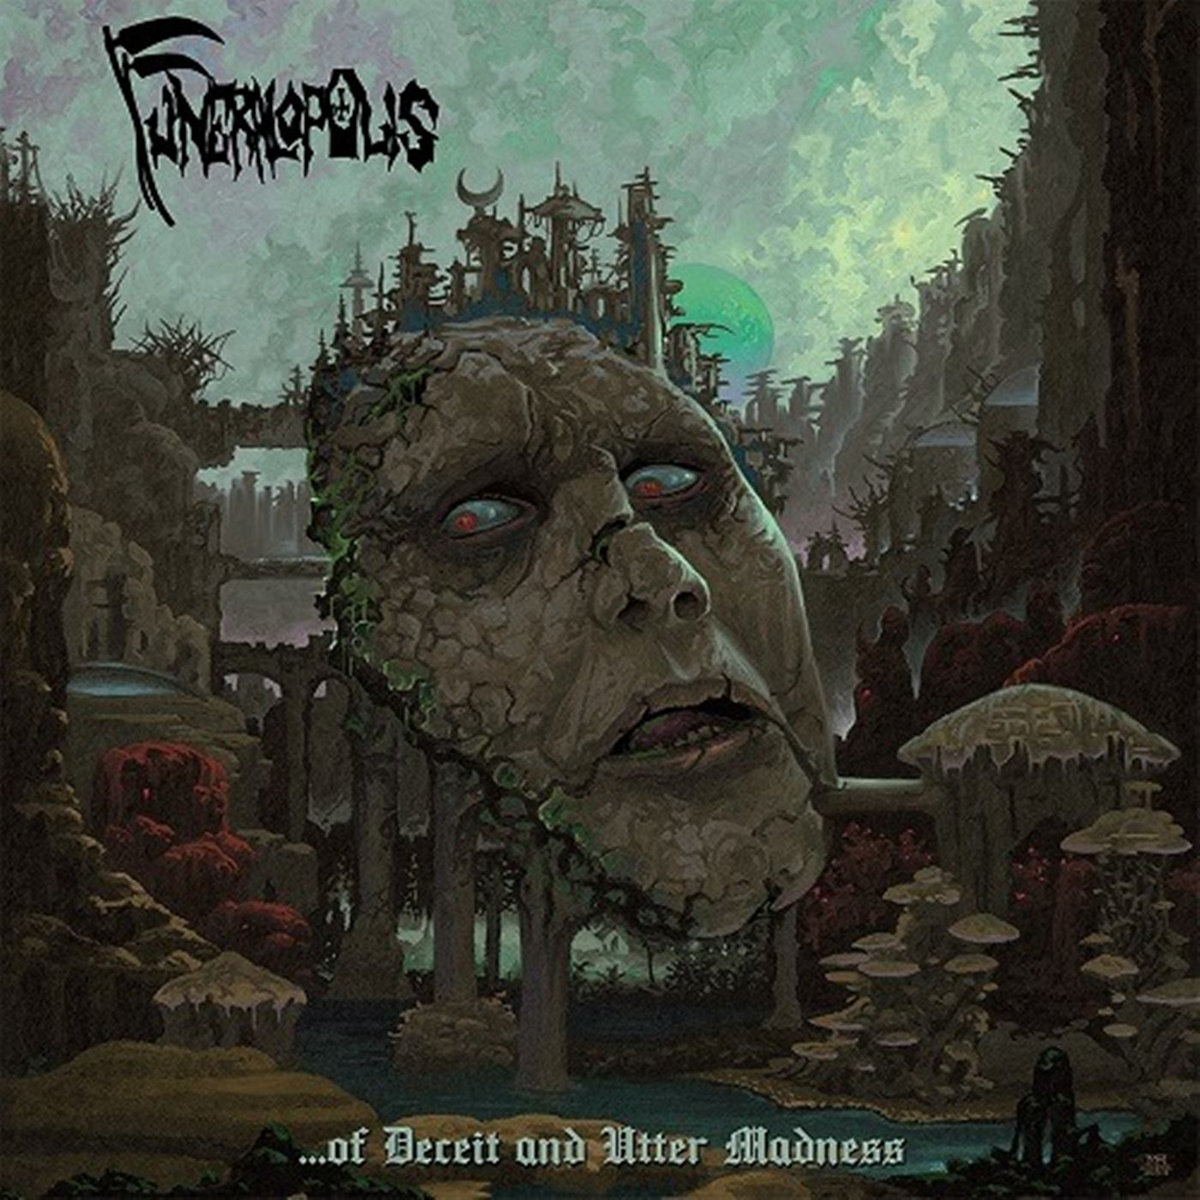 funeralopolis – …of deceit and utter madness